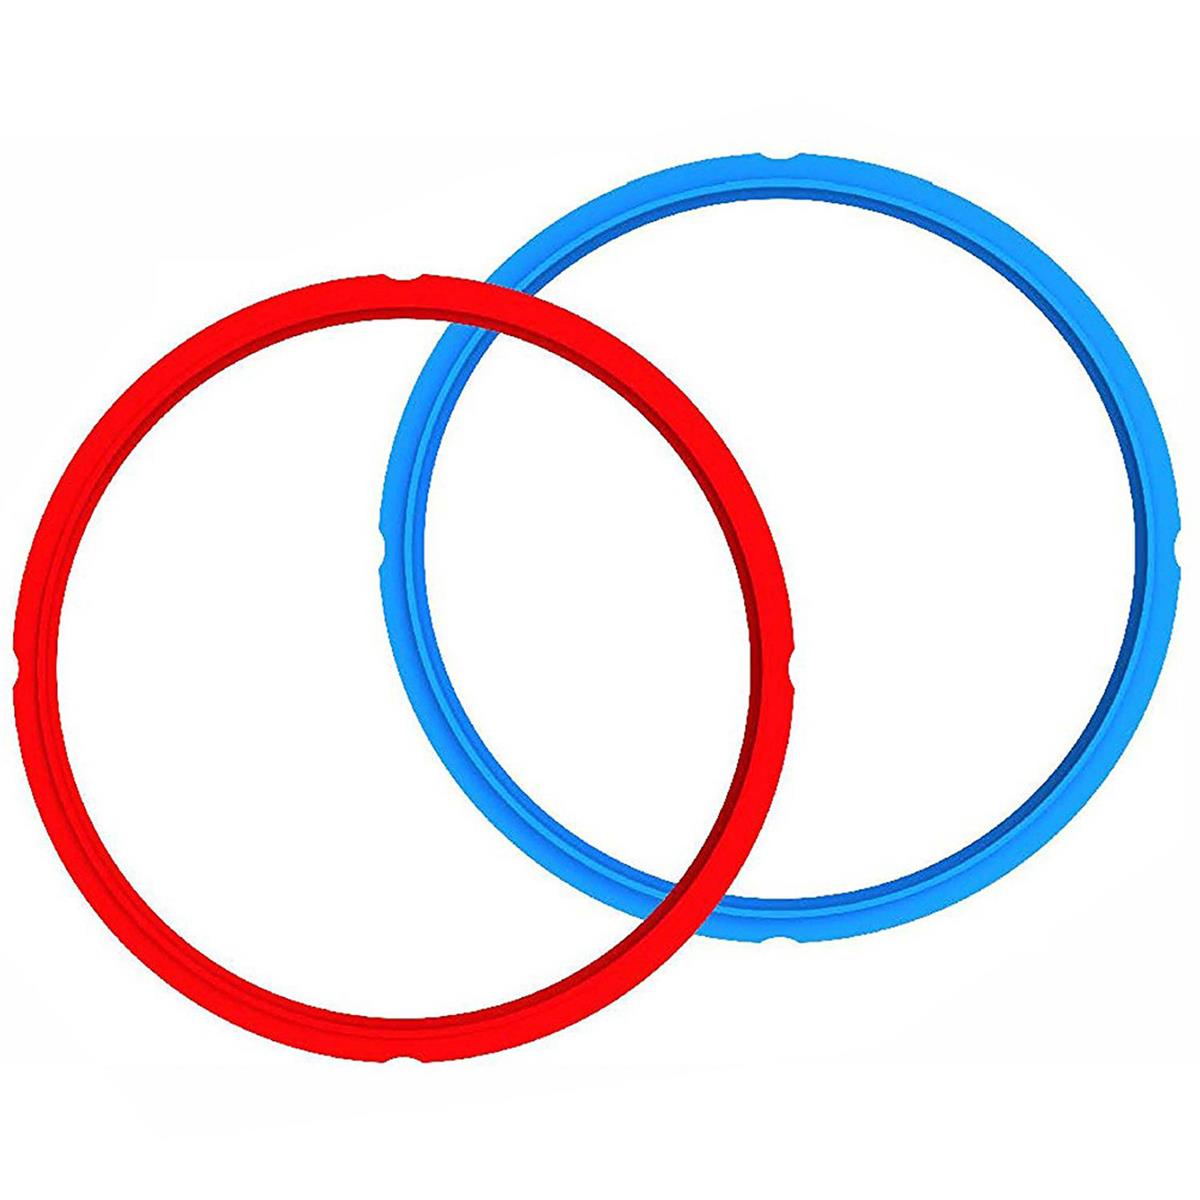 ® - set of 2 silicone safety seals (red and blue) for 5.7 liter models